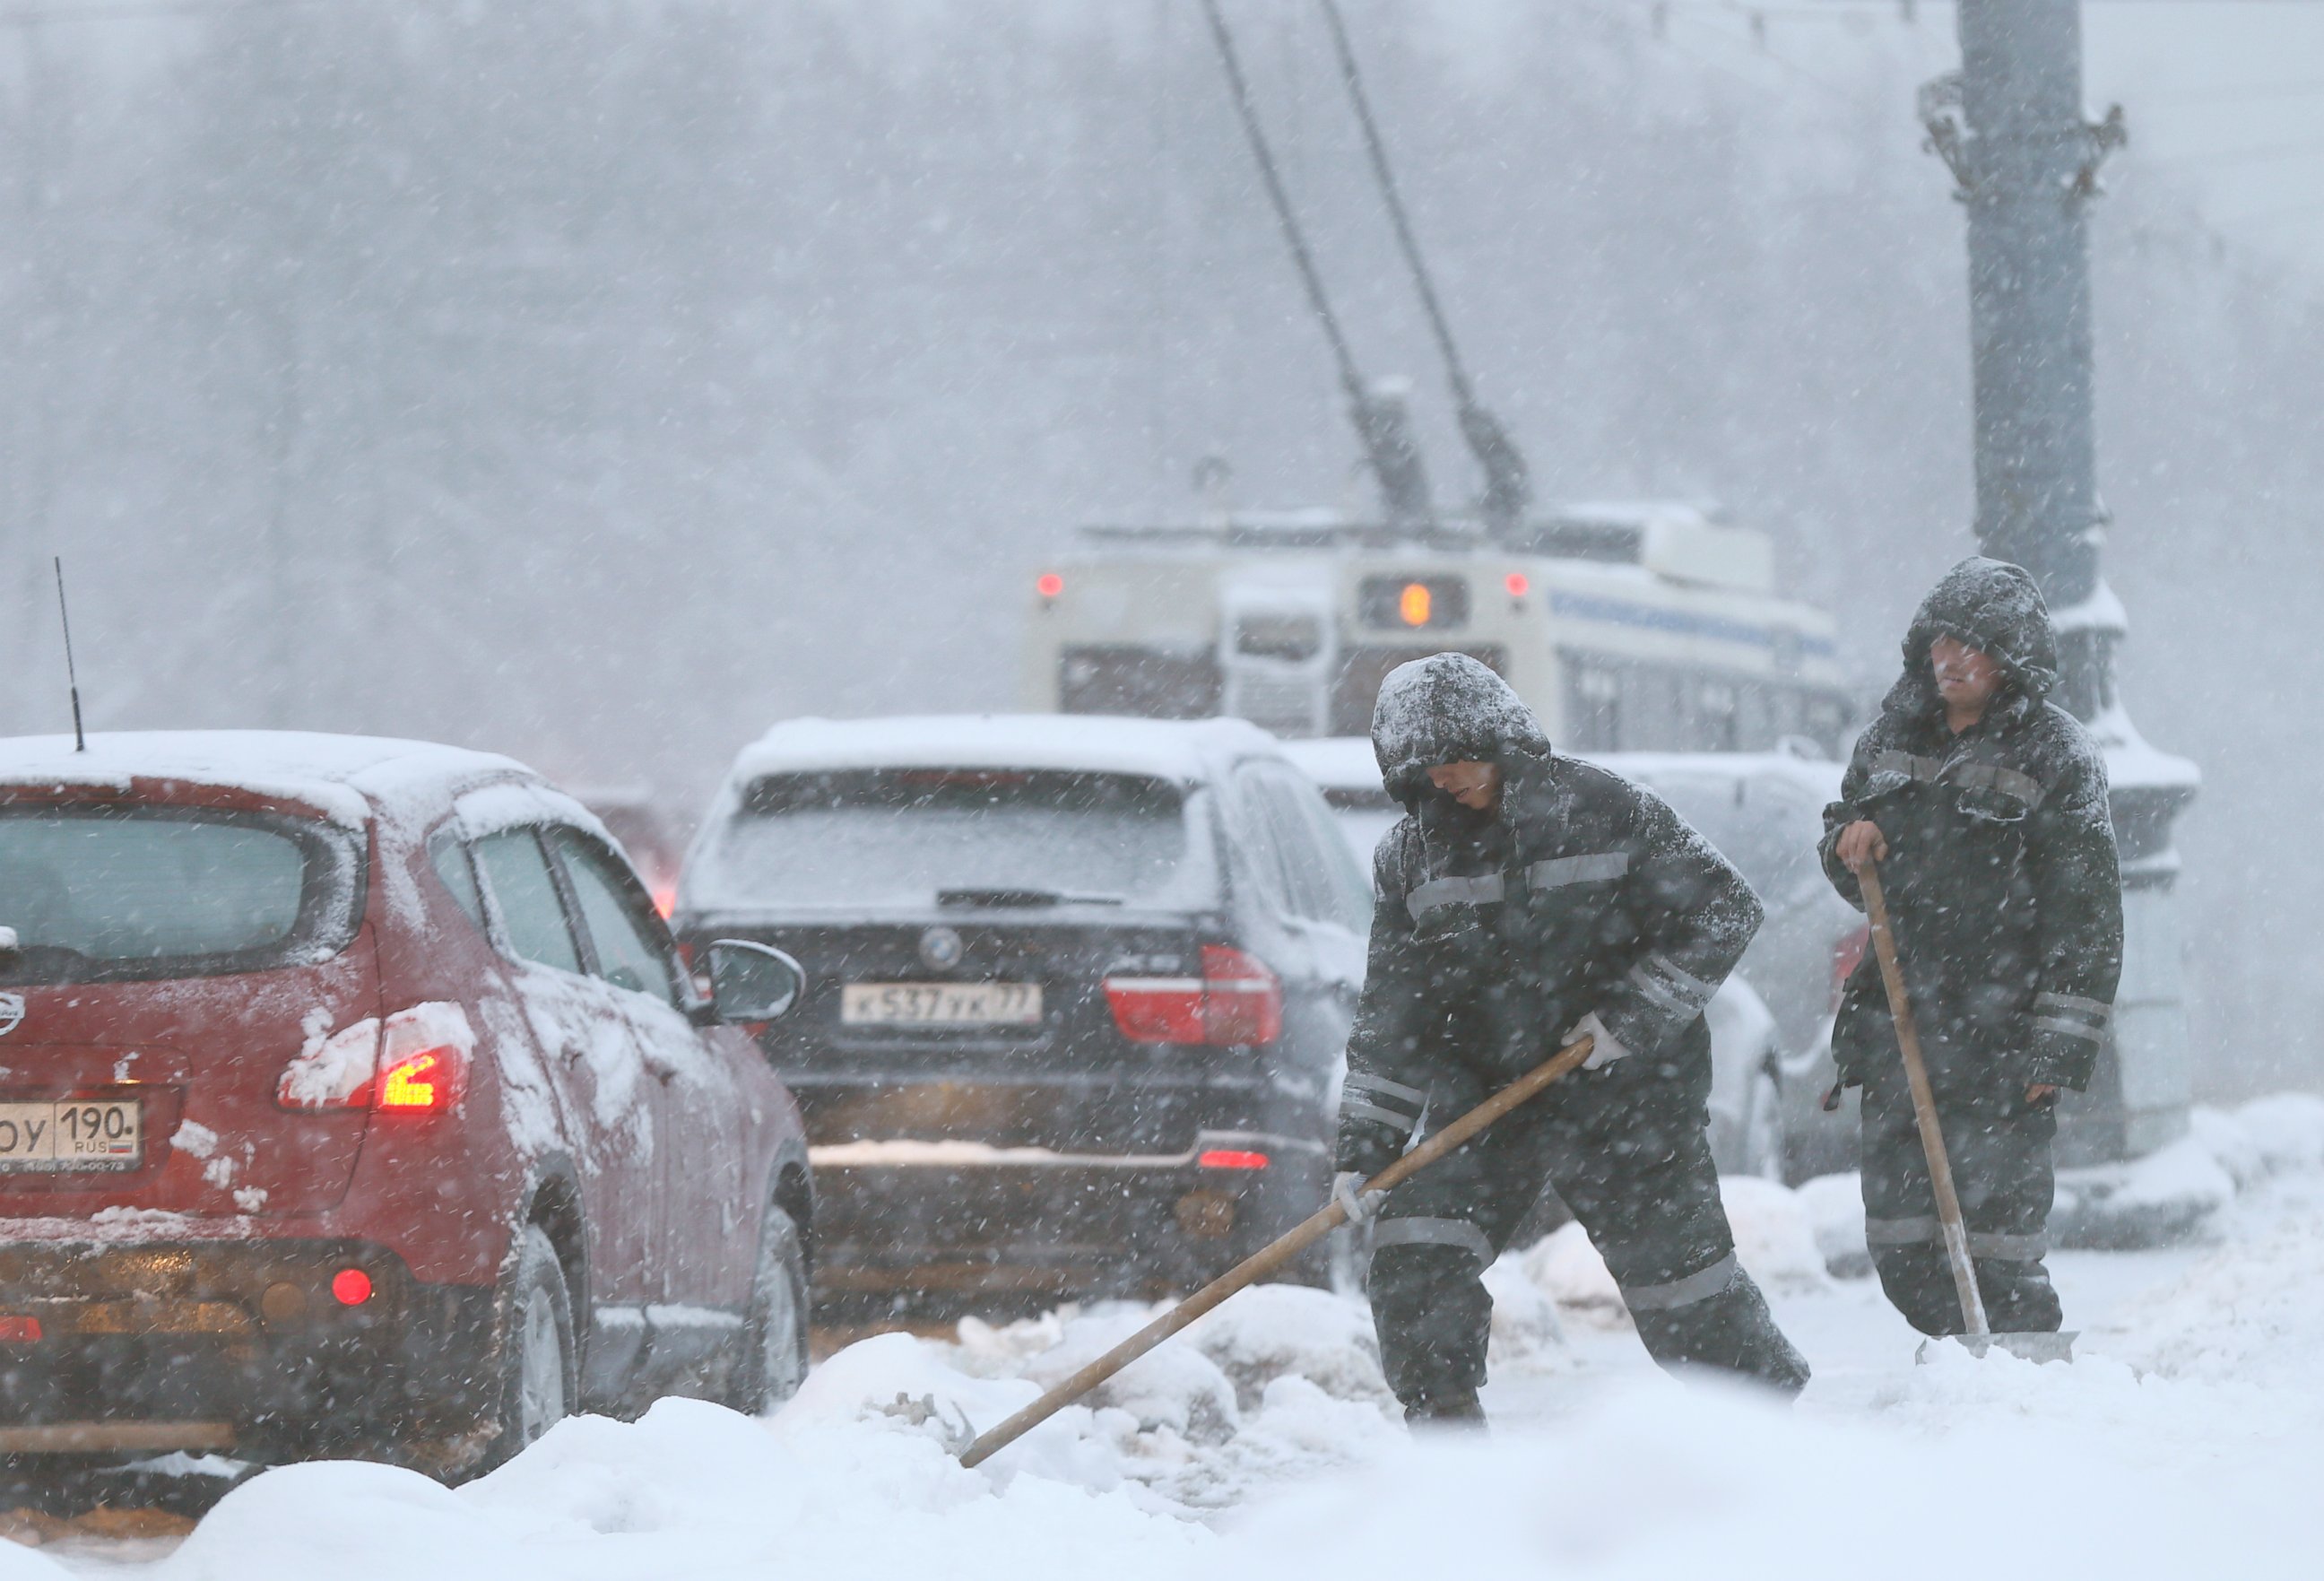 PHOTO: Municipal workers clear away snow from the road during heavy snowfall in Moscow, Russia, Feb. 3, 2015.